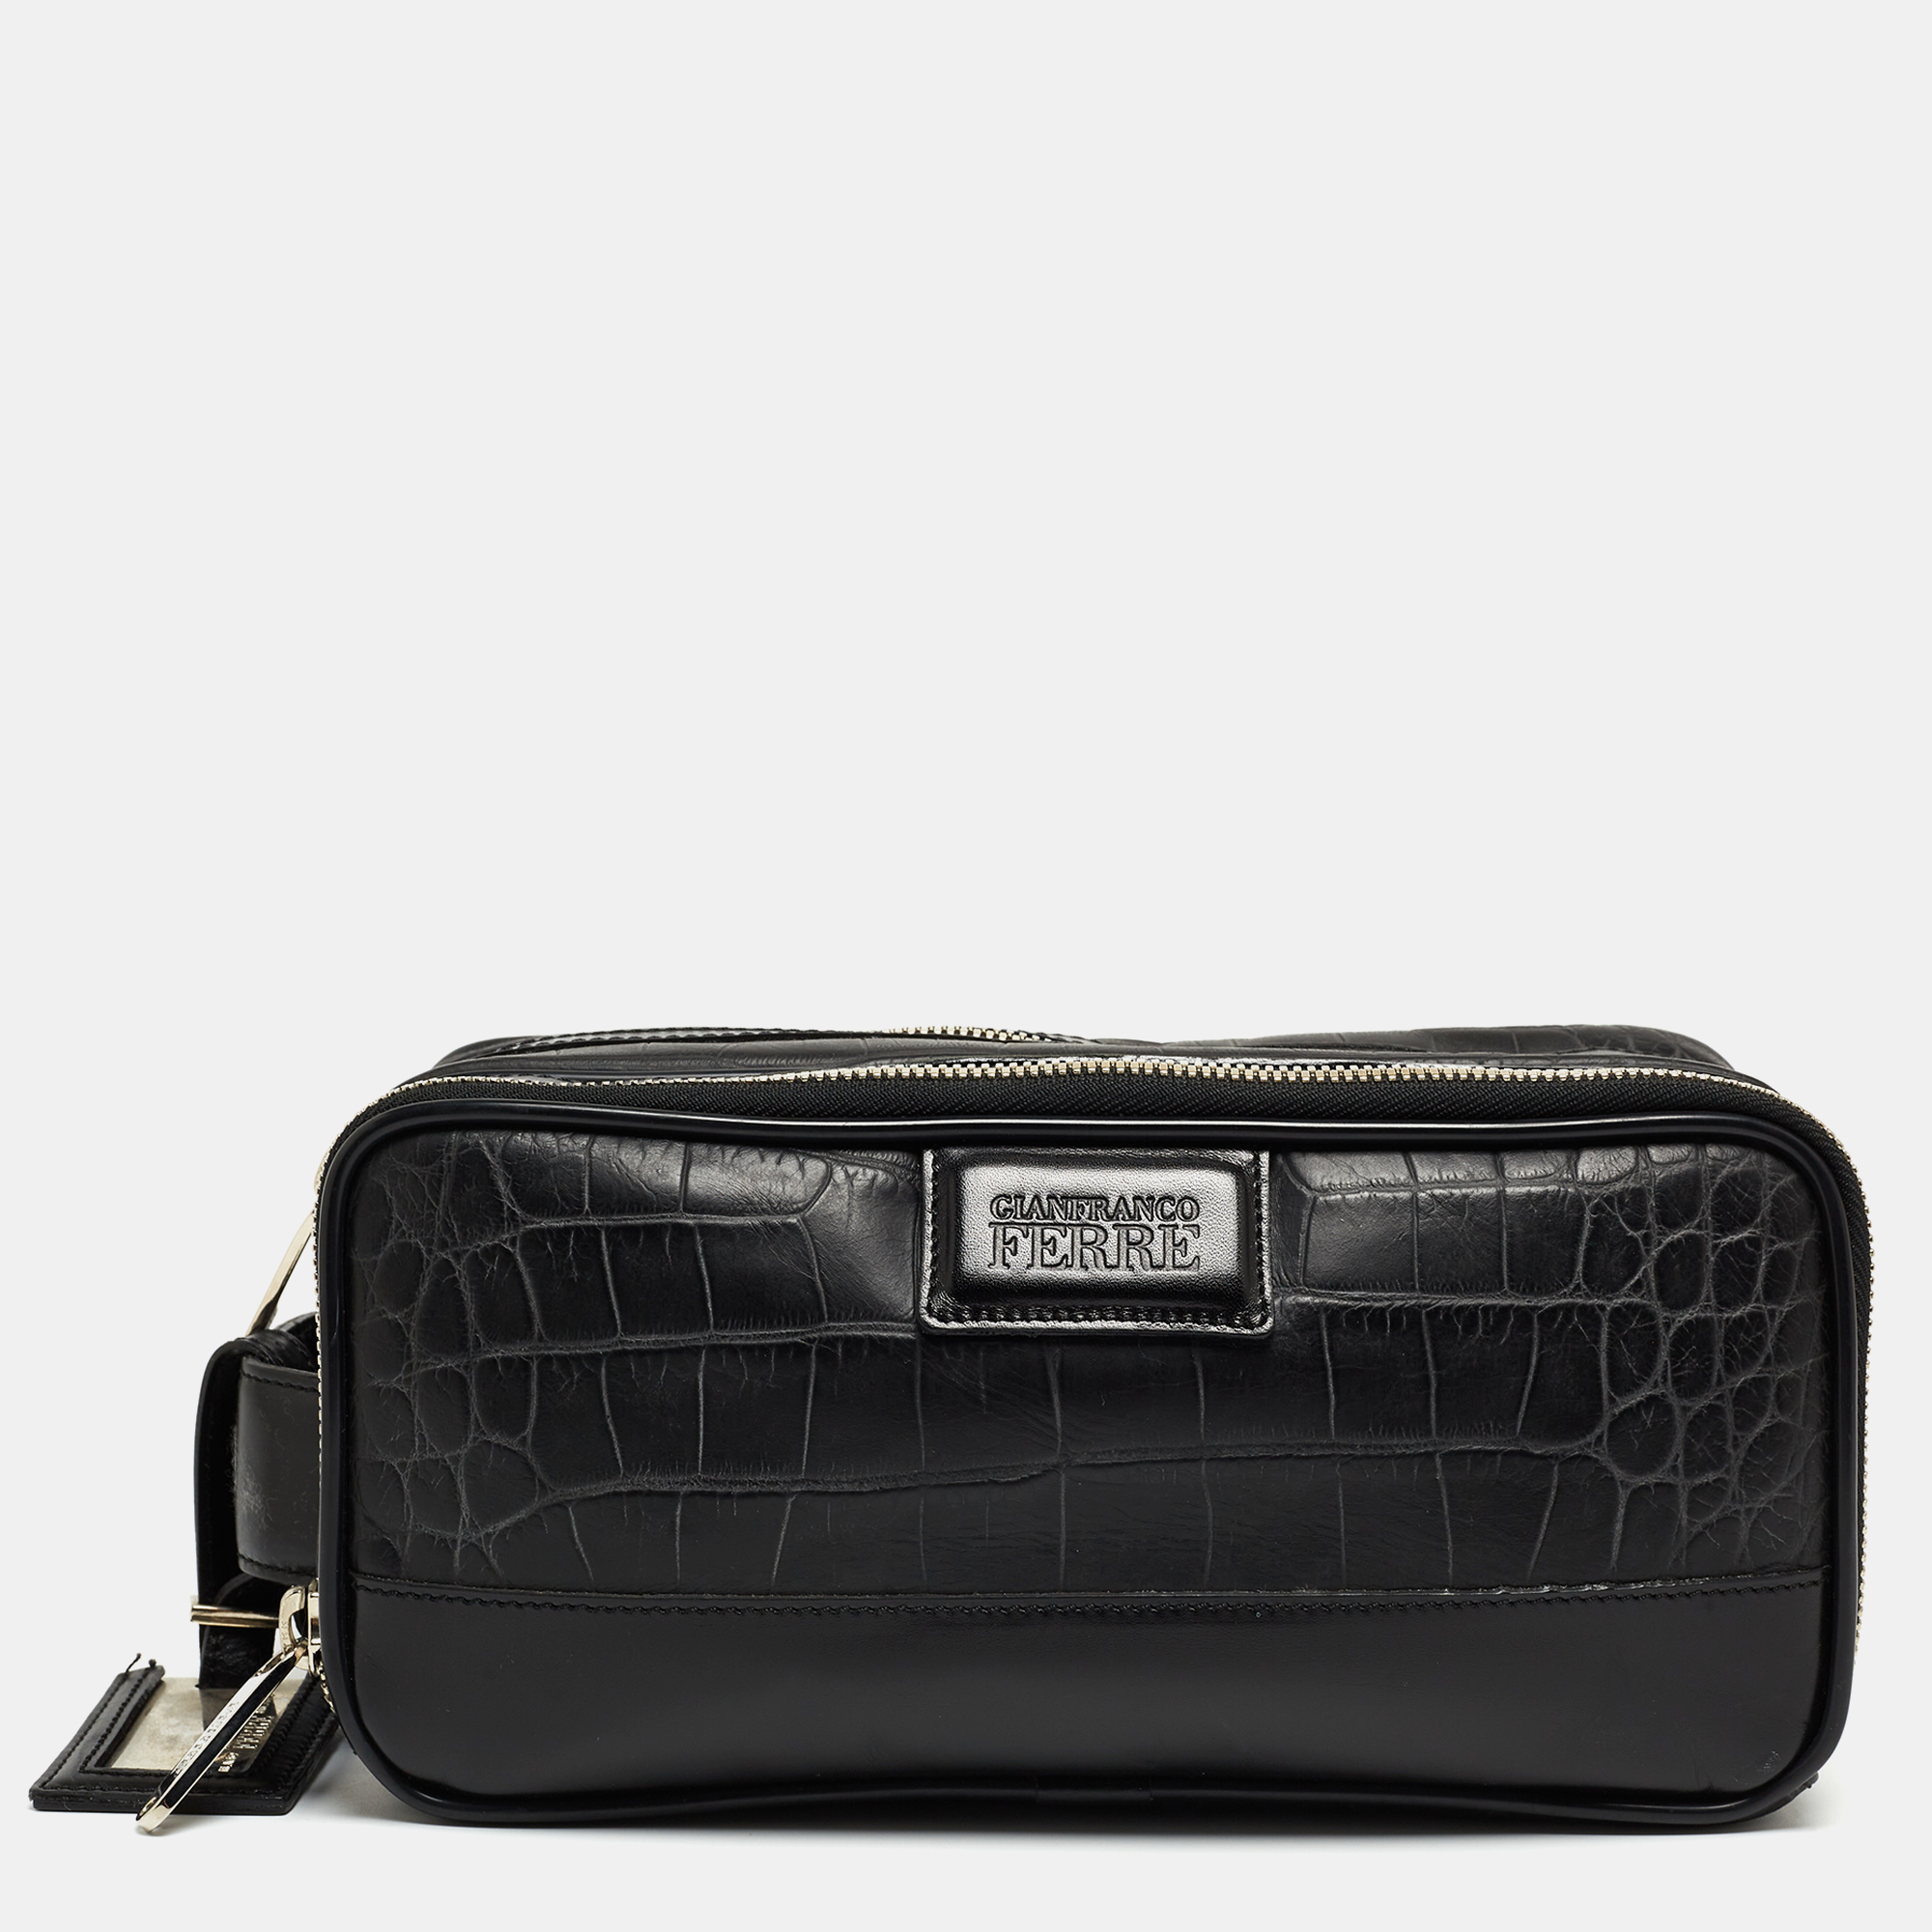 Gianfranco ferre black croc embossed leather oversized pouch